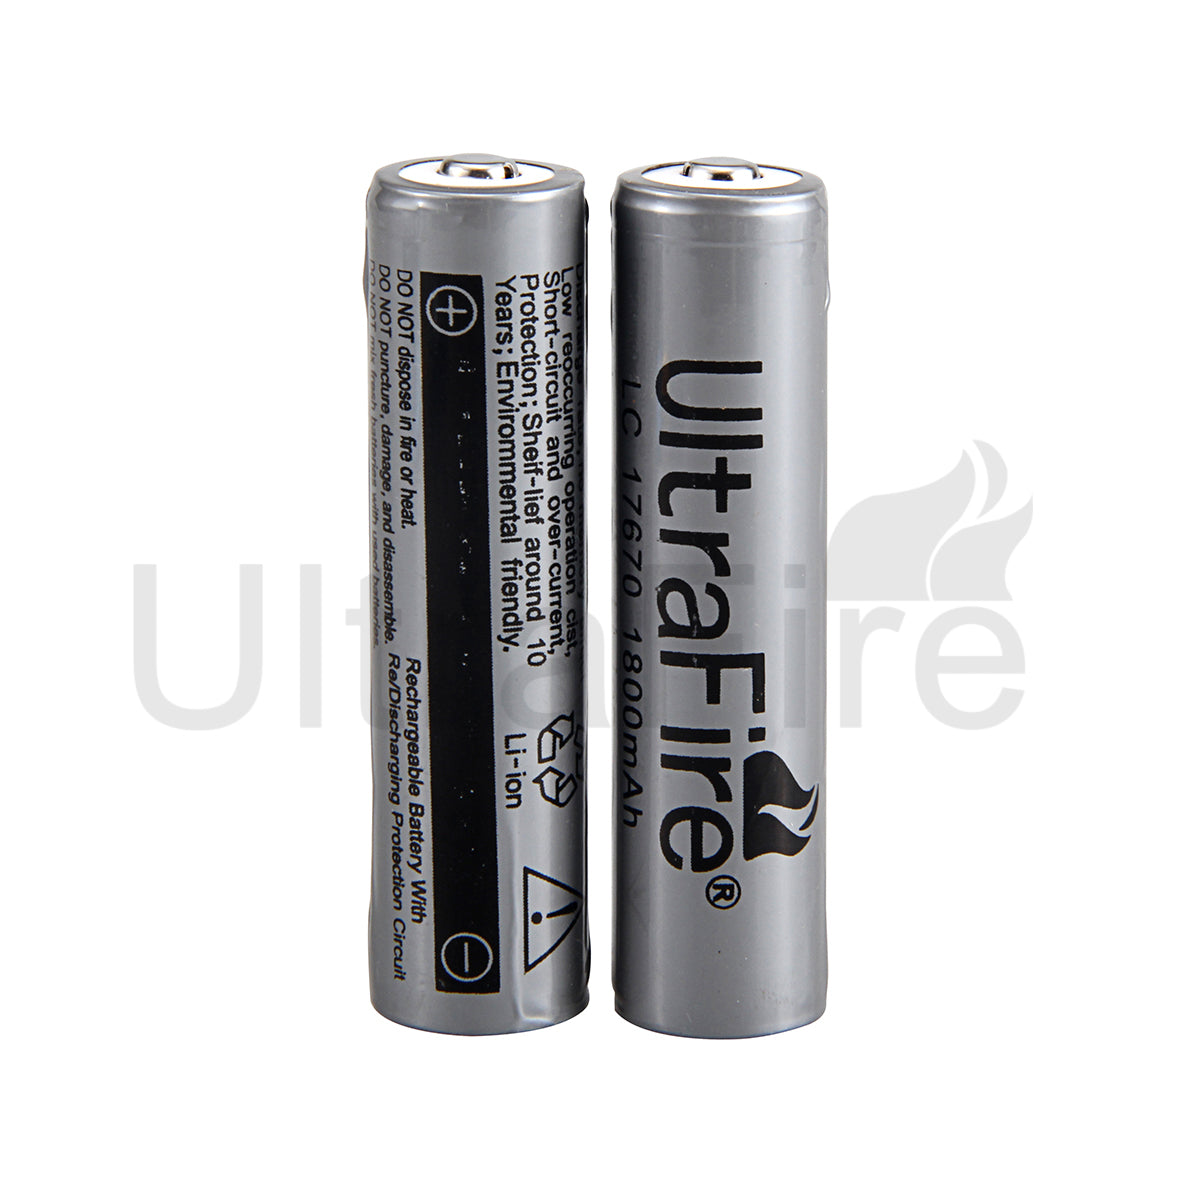 UltraFire 1800mAh 3.7V 17670 Rechargeable Lithium Battery With Protect